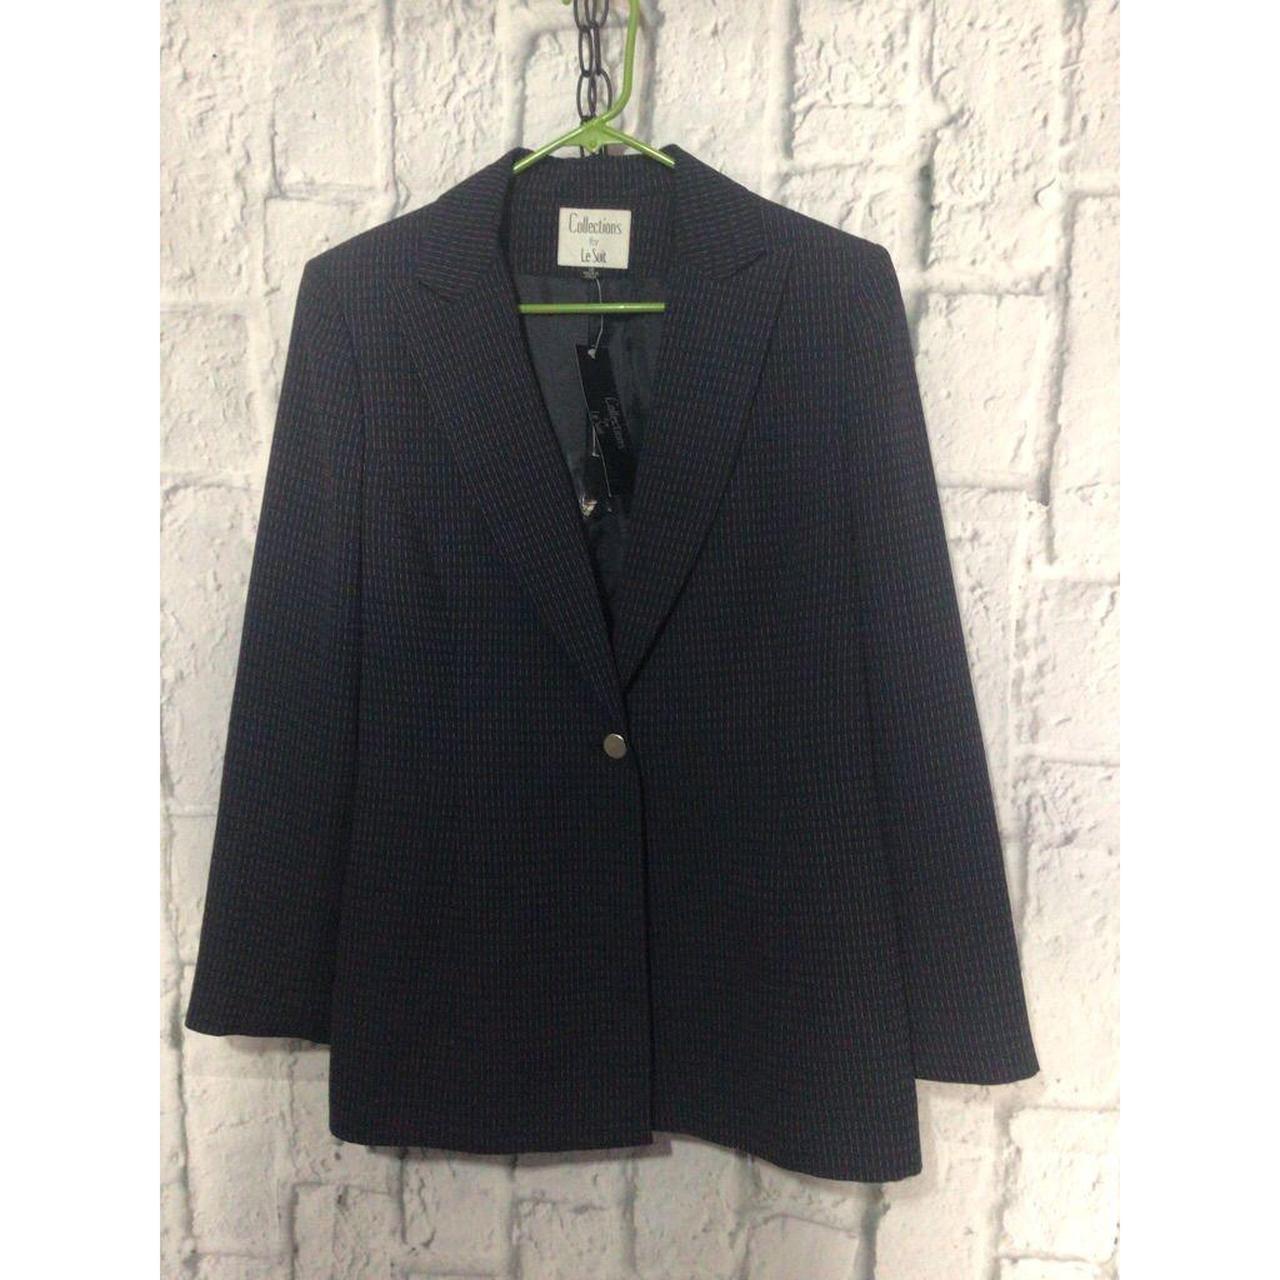 New With Tags Navy / White Pinstripe Le Suit... - Depop